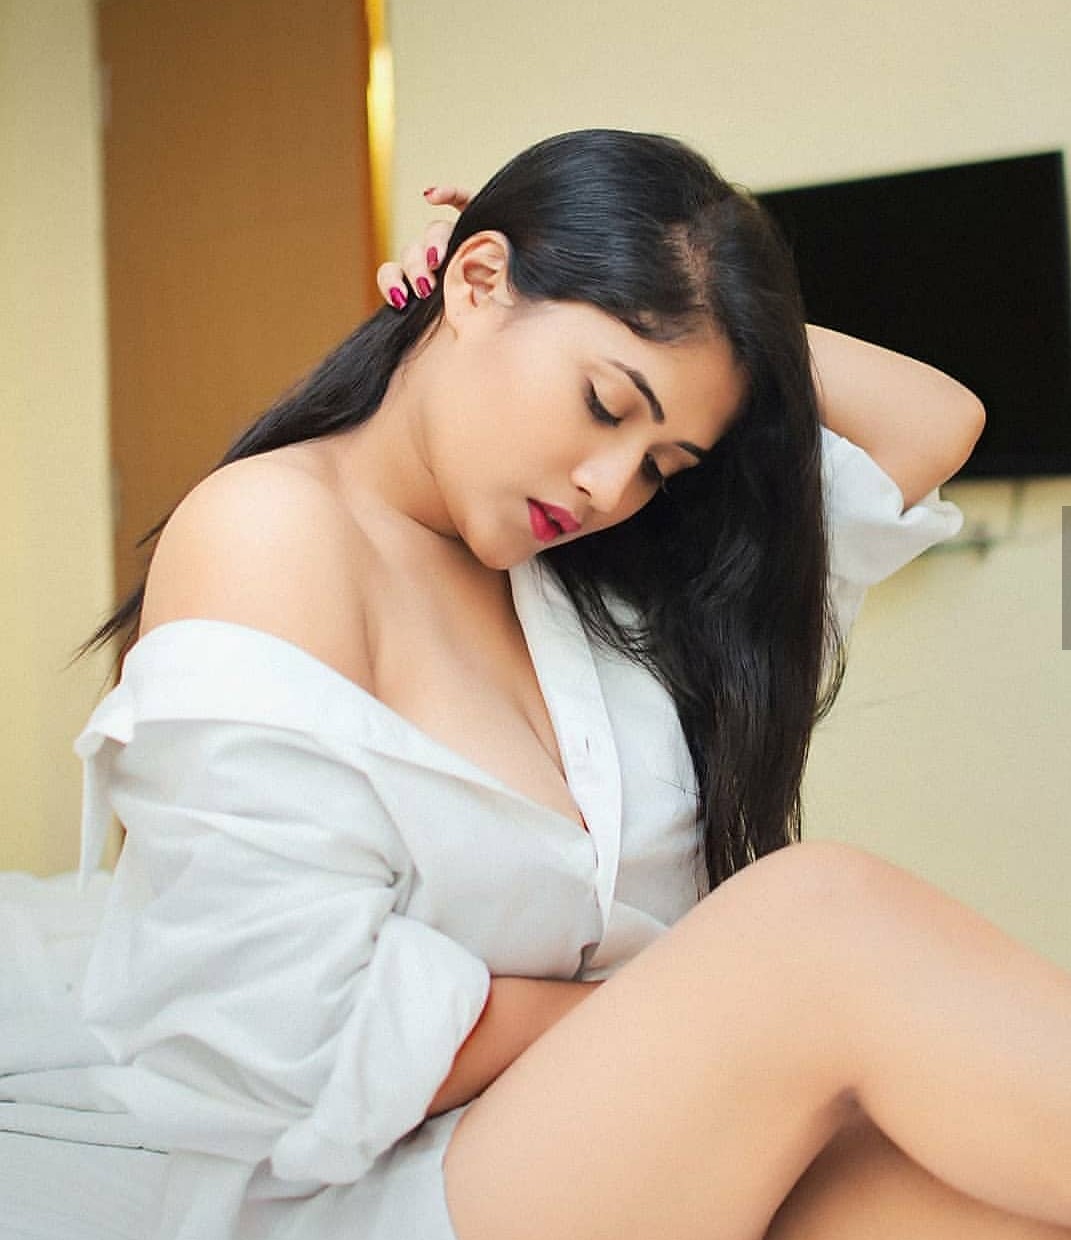  Call girls in delhi 9711168618 Welcome To Vip Escort Services In Delh,South West Delhi,Others,Free Classifieds,Post Free Ads,77traders.com